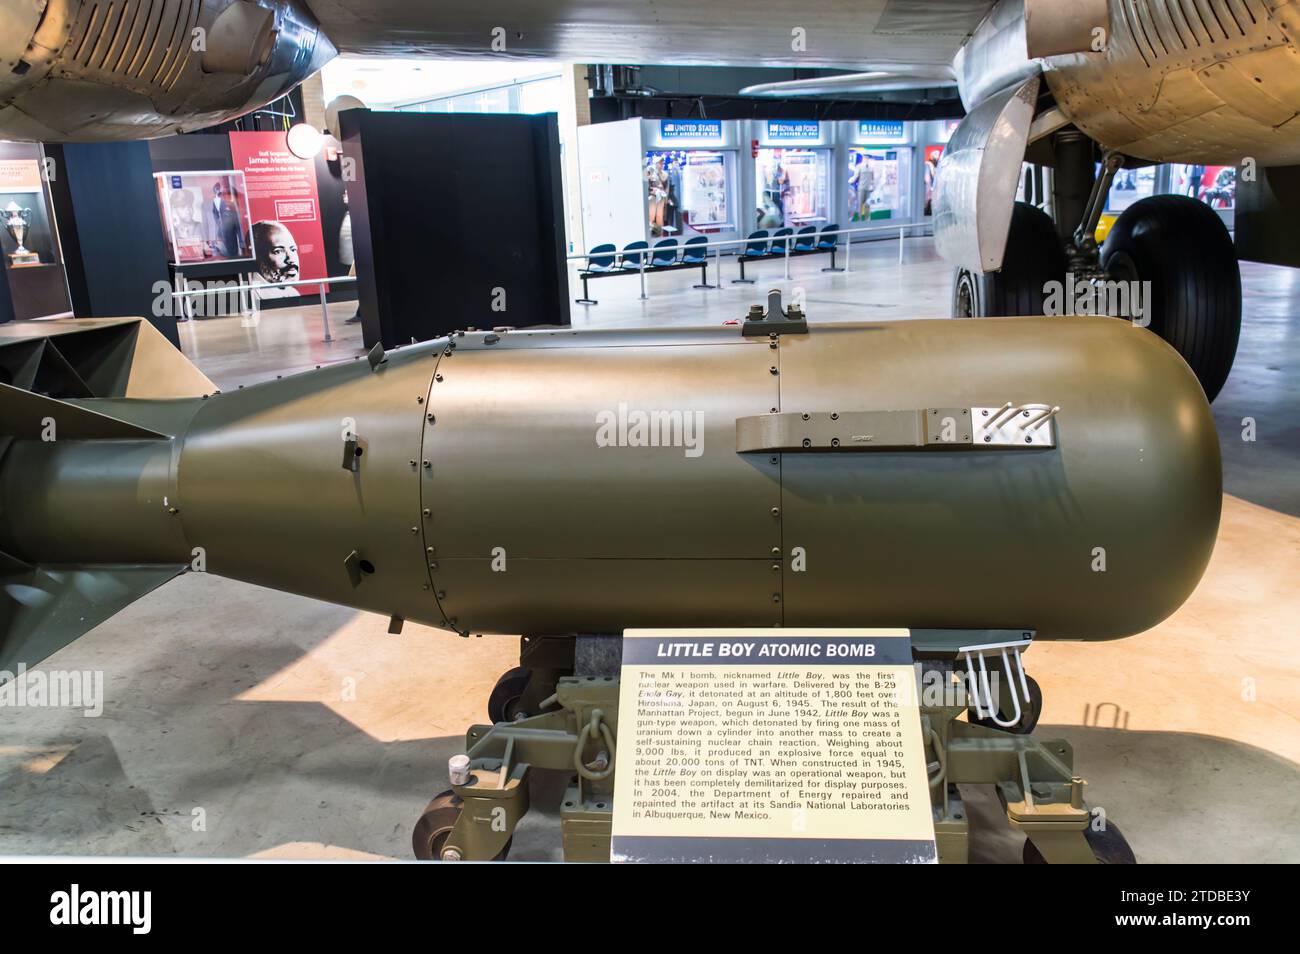 Little Boy the first nuclear weapon used in warfare dropped on Hiroshima on 6th August 1945 Stock Photo